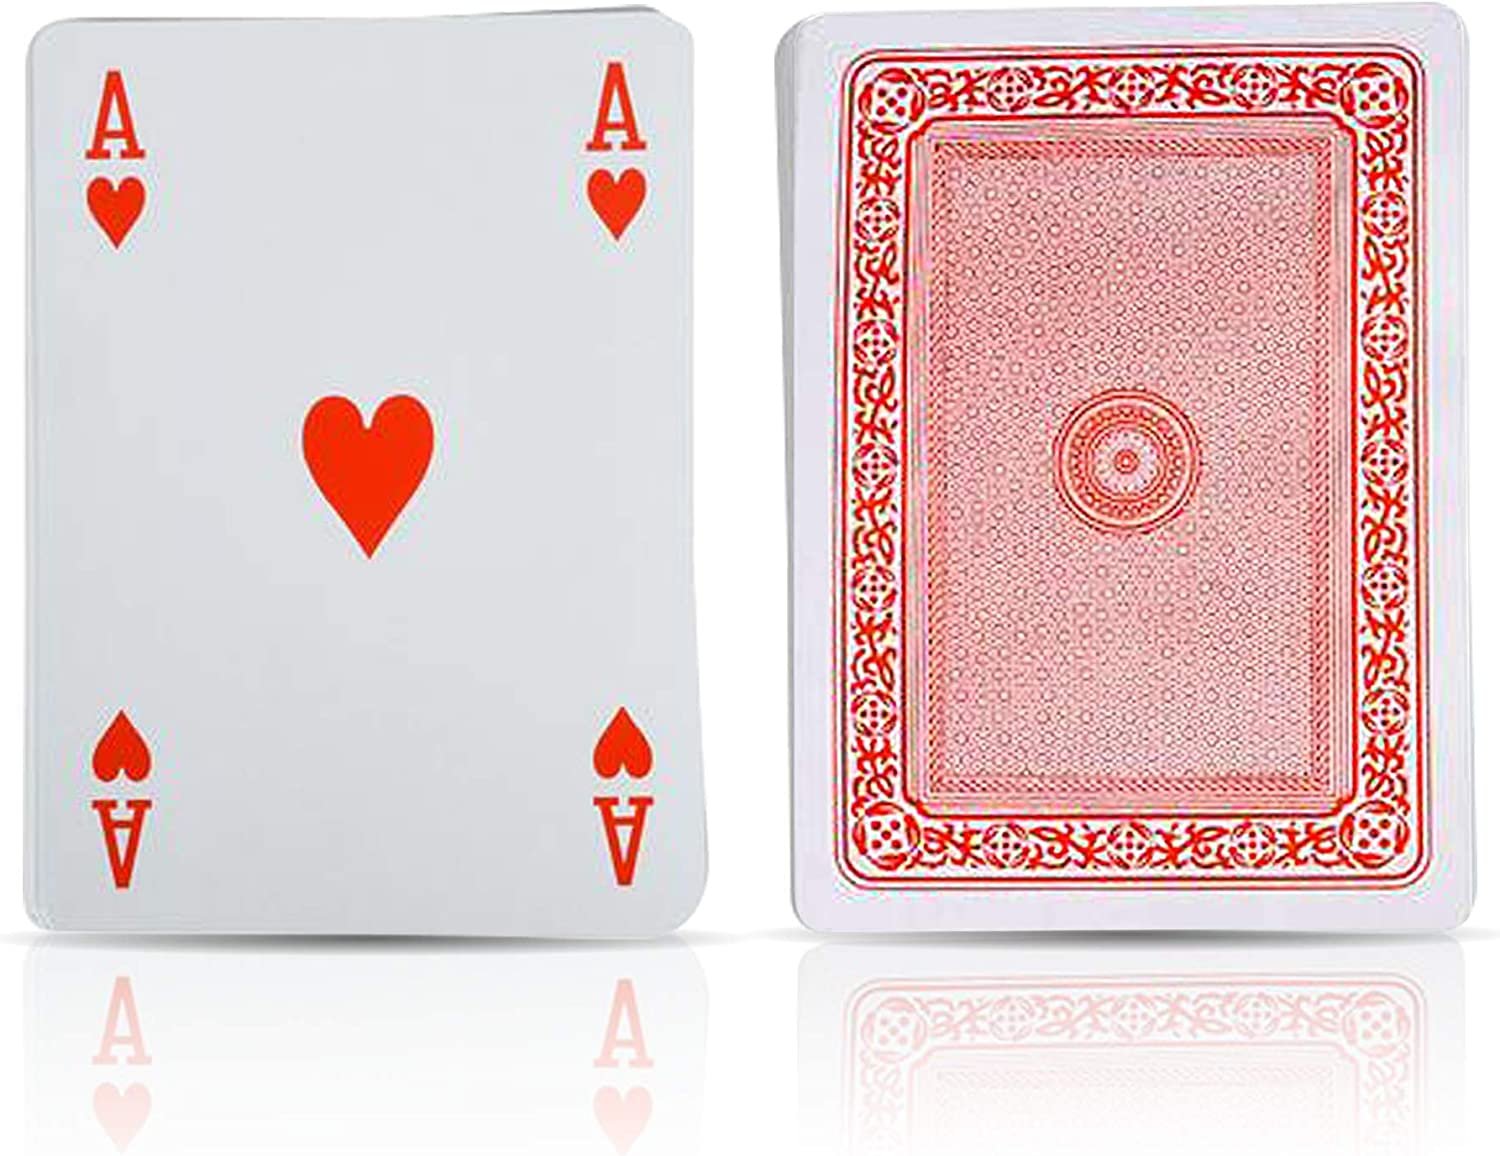 Gamie Giant 5 X 7 Inch Playing Cards - Pack of 3 - Oversized Super Big Poker Card Set - Huge Casino Game Cards for Kids, Men, Women and Seniors - Great Novelty Gift Idea